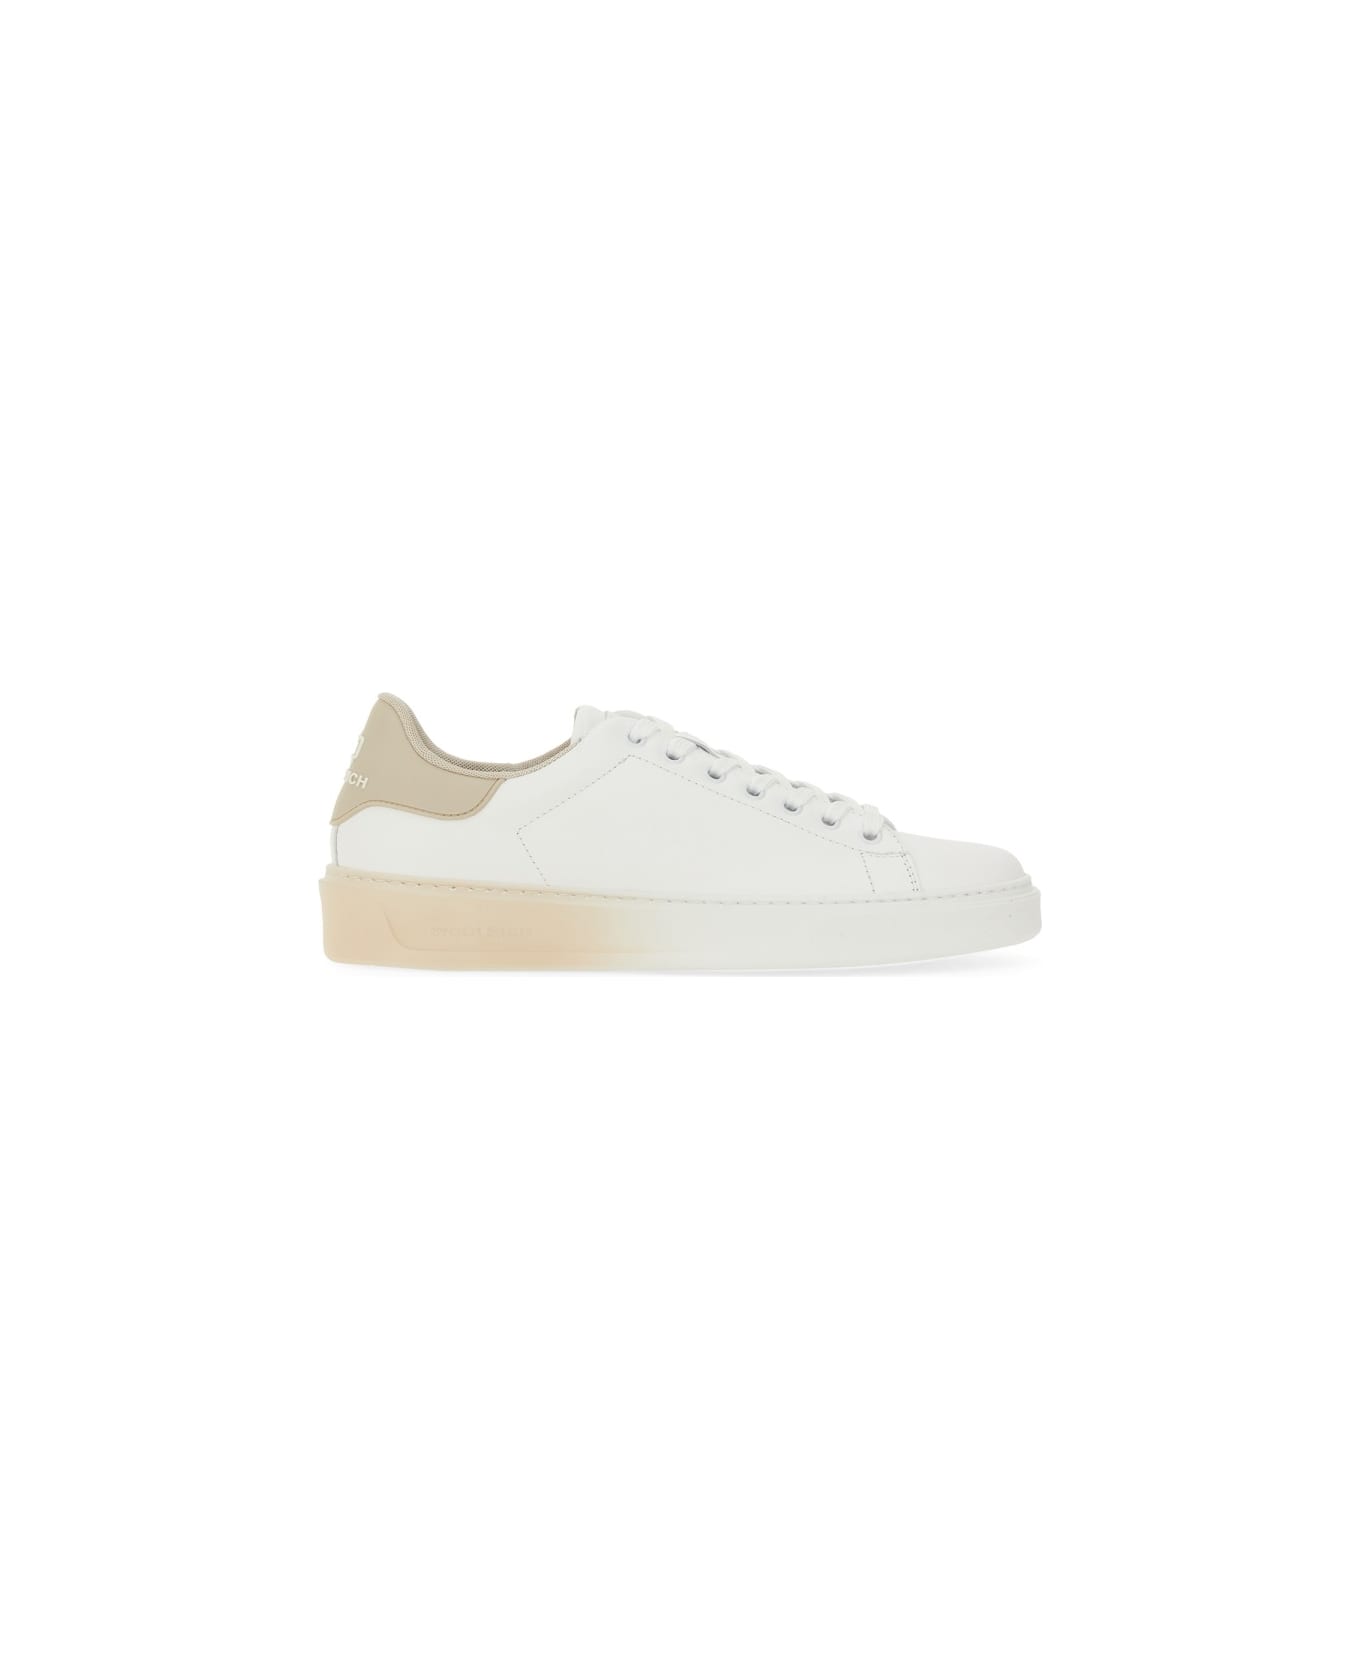 Woolrich Leather Sneaker - White サンダル